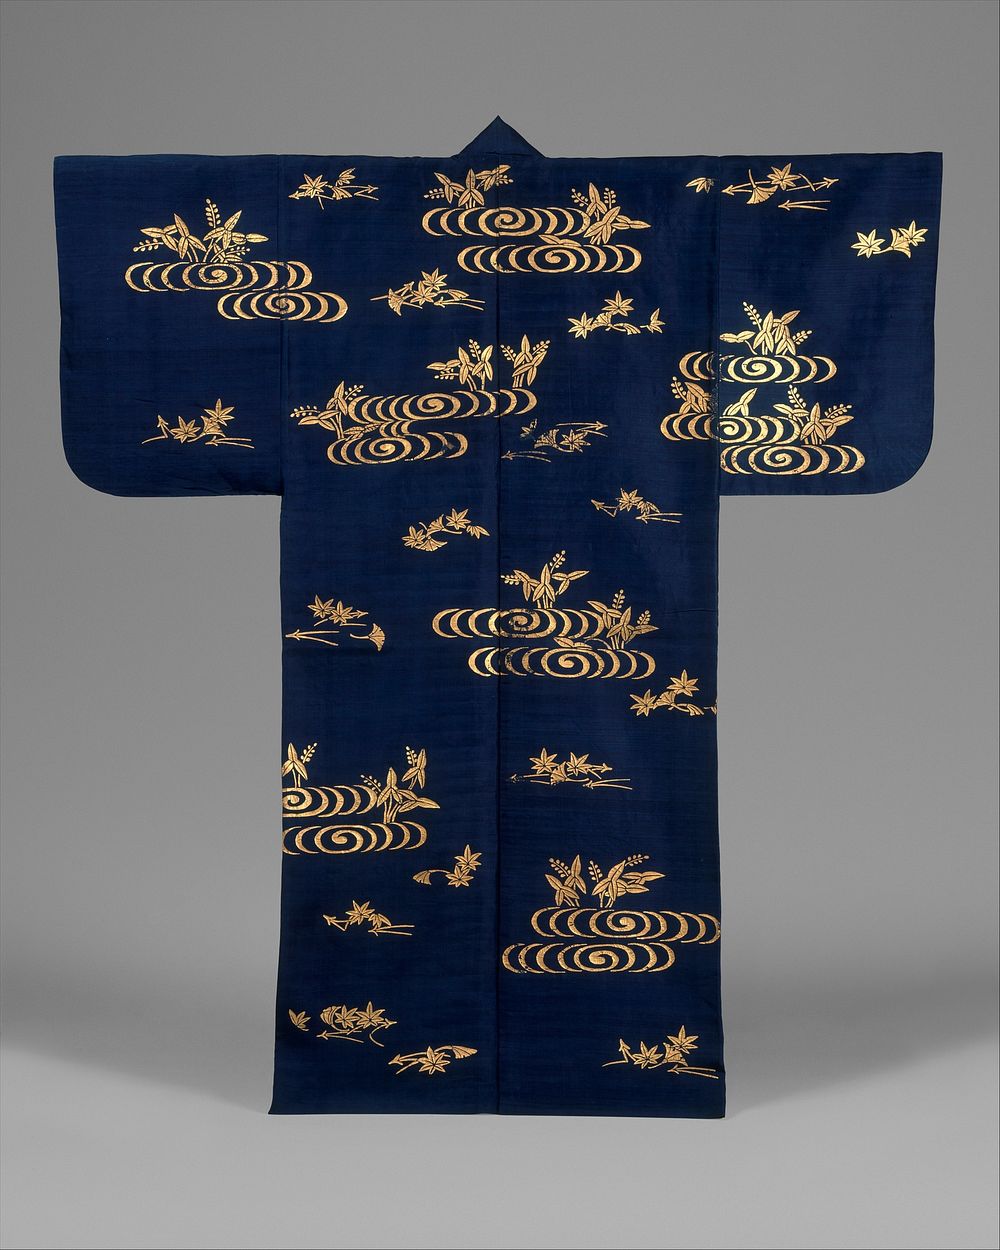 Noh Costume (Surihaku) with Water, Water Plants, and Leaves